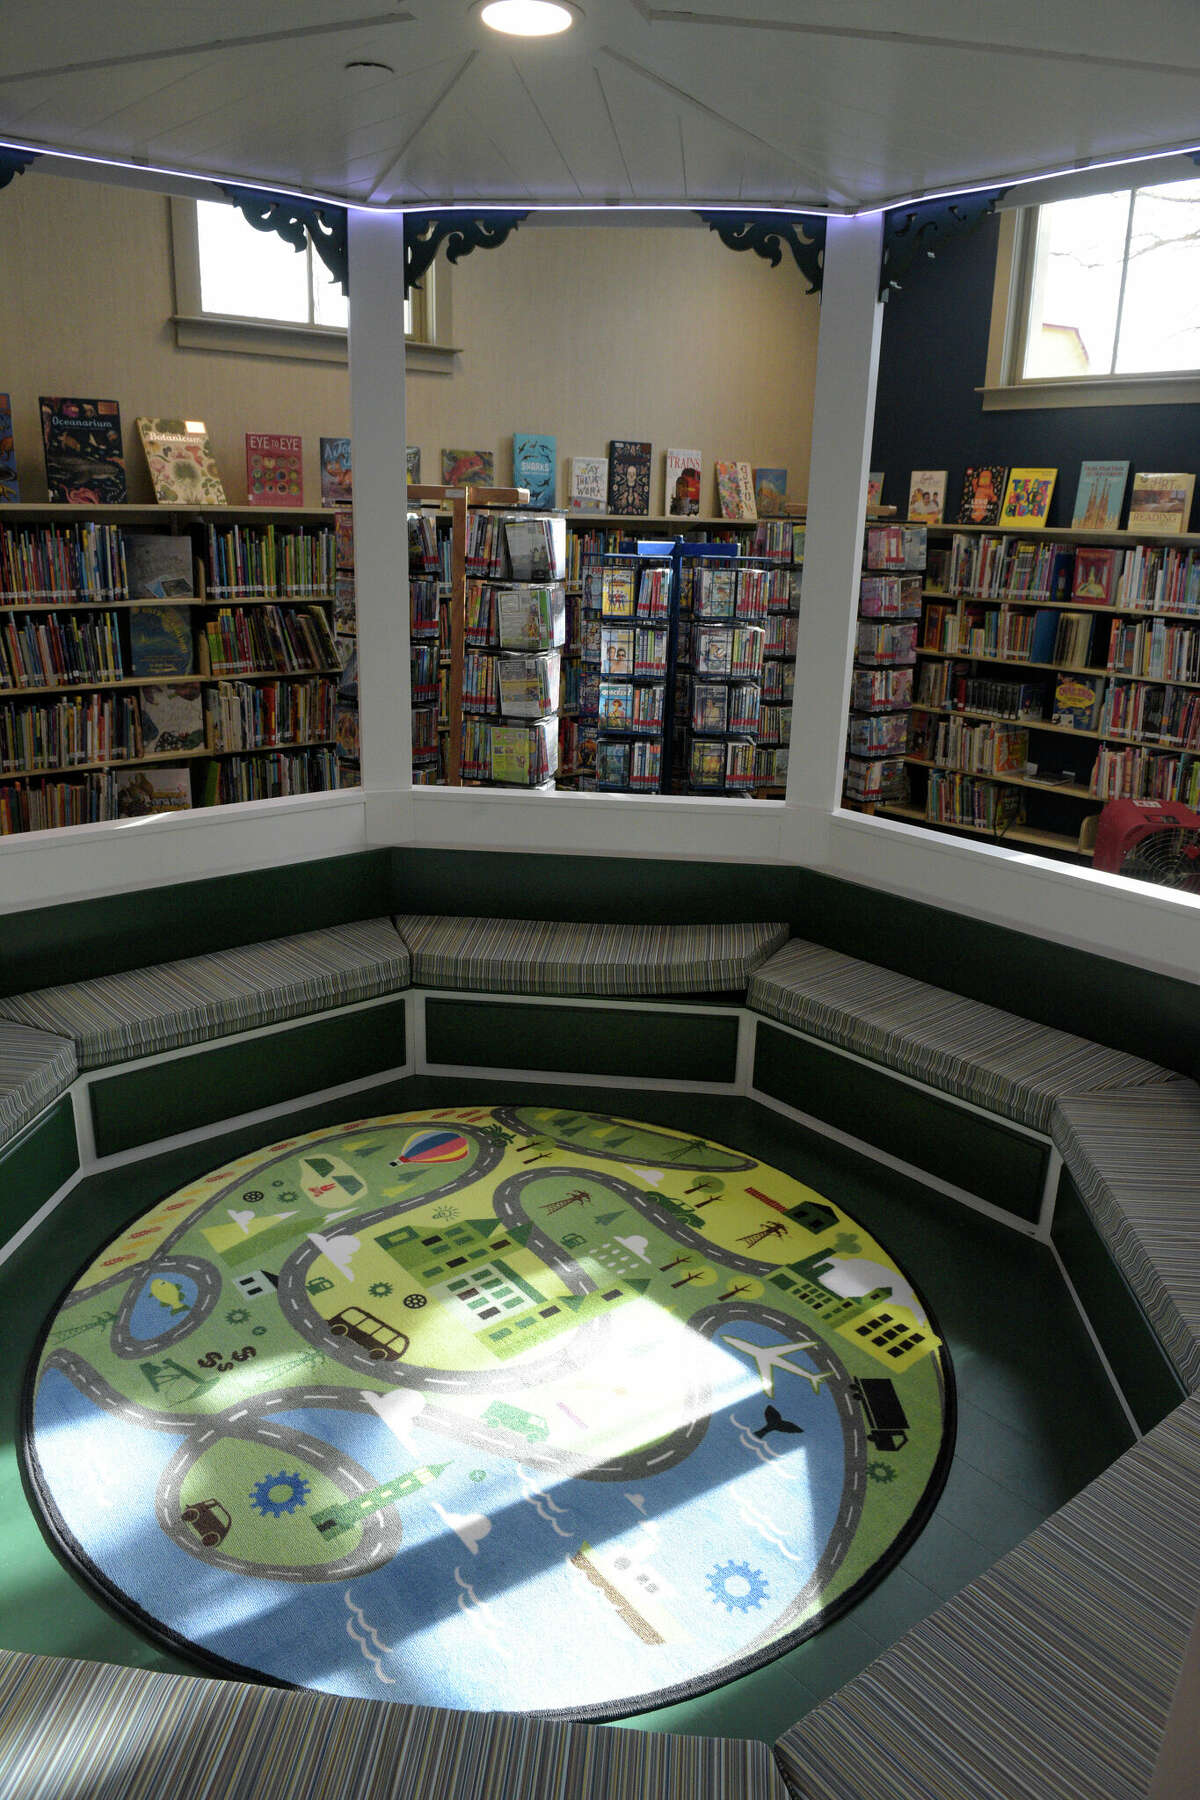 The inside of the gazebo located in the children's section in the newly renovated New Milford Public Library on Tuesday, February 7, 2023, in New Milford, Conn. A new patio can be seen outside.